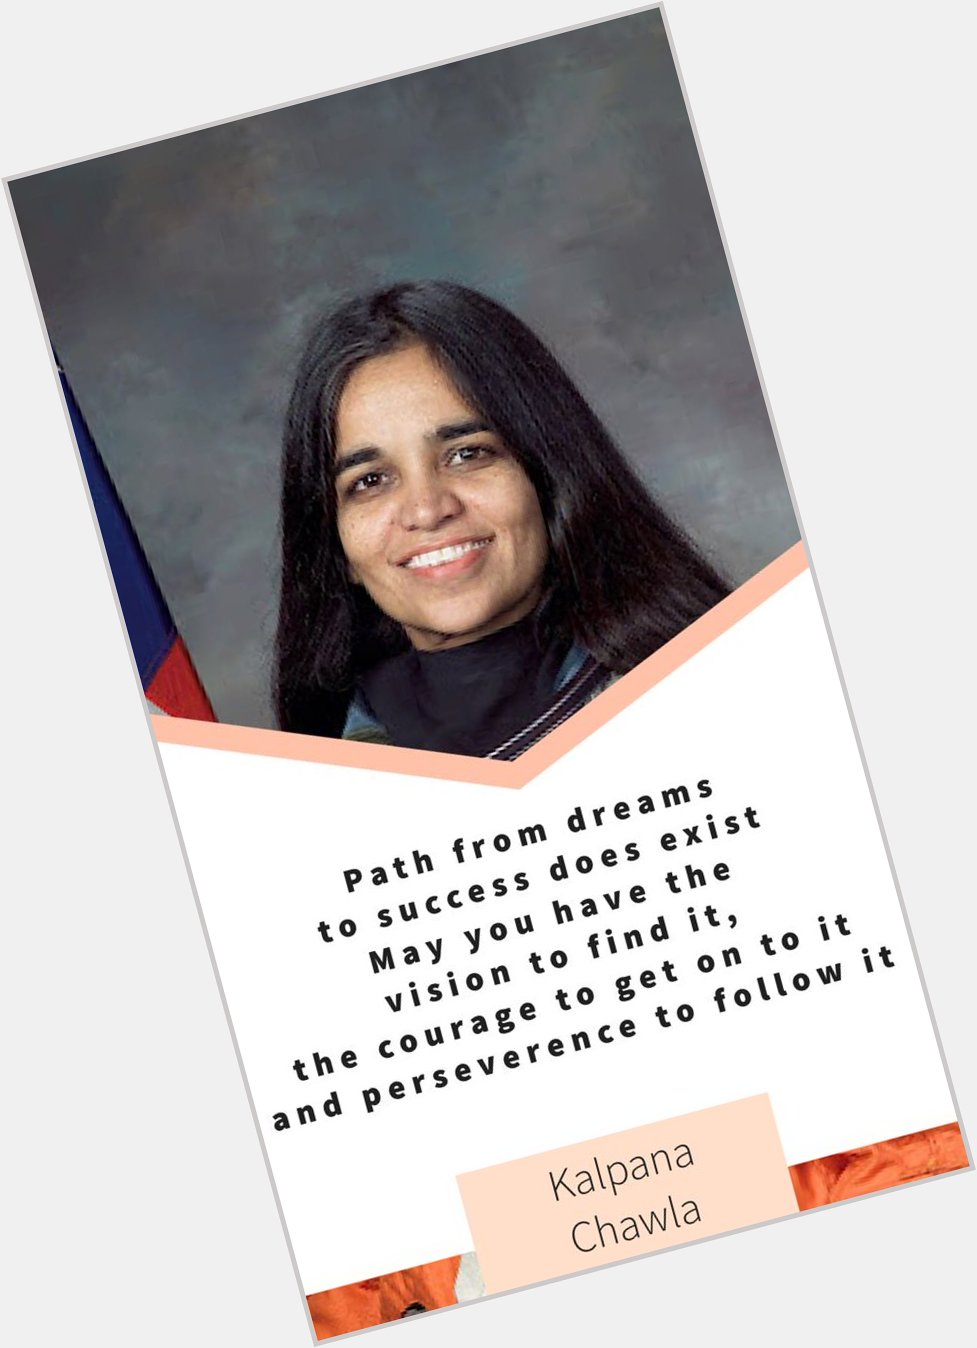 Her life is nothing short of an inspiration!
Happy Birthday Kalpana Chawla! 